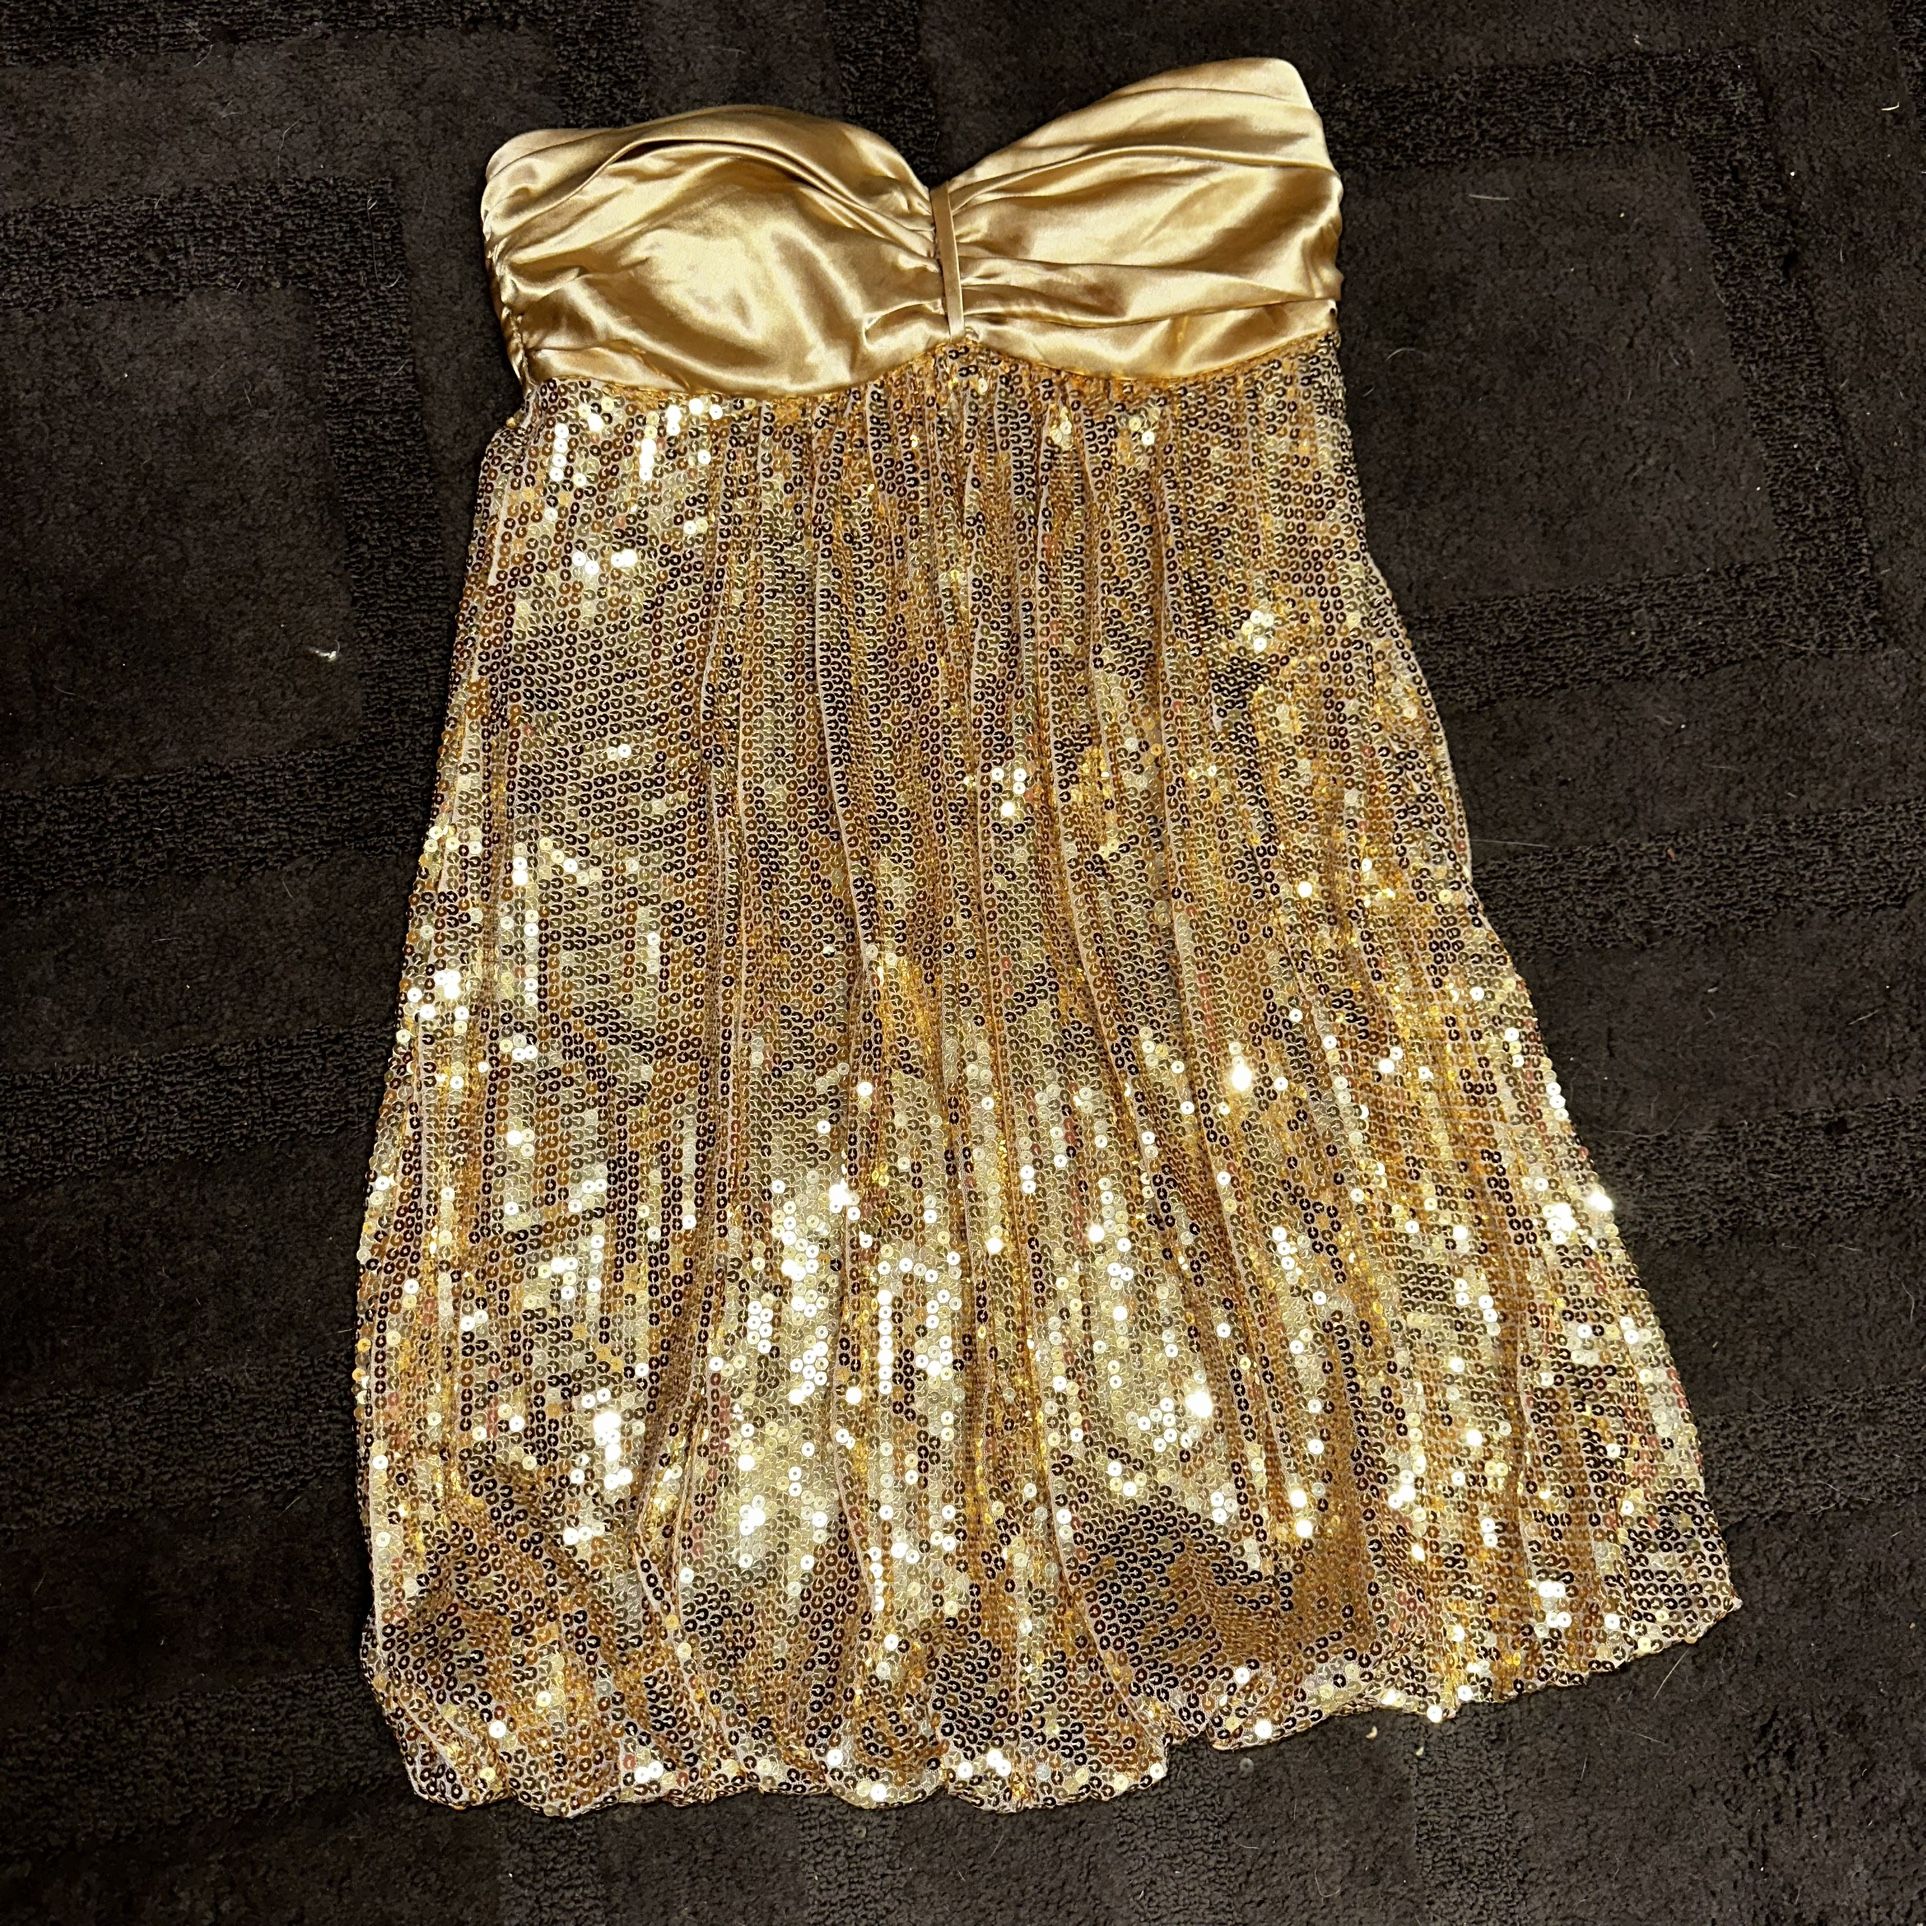 Windsor Gold Sequin Dress New With Tags Size 7